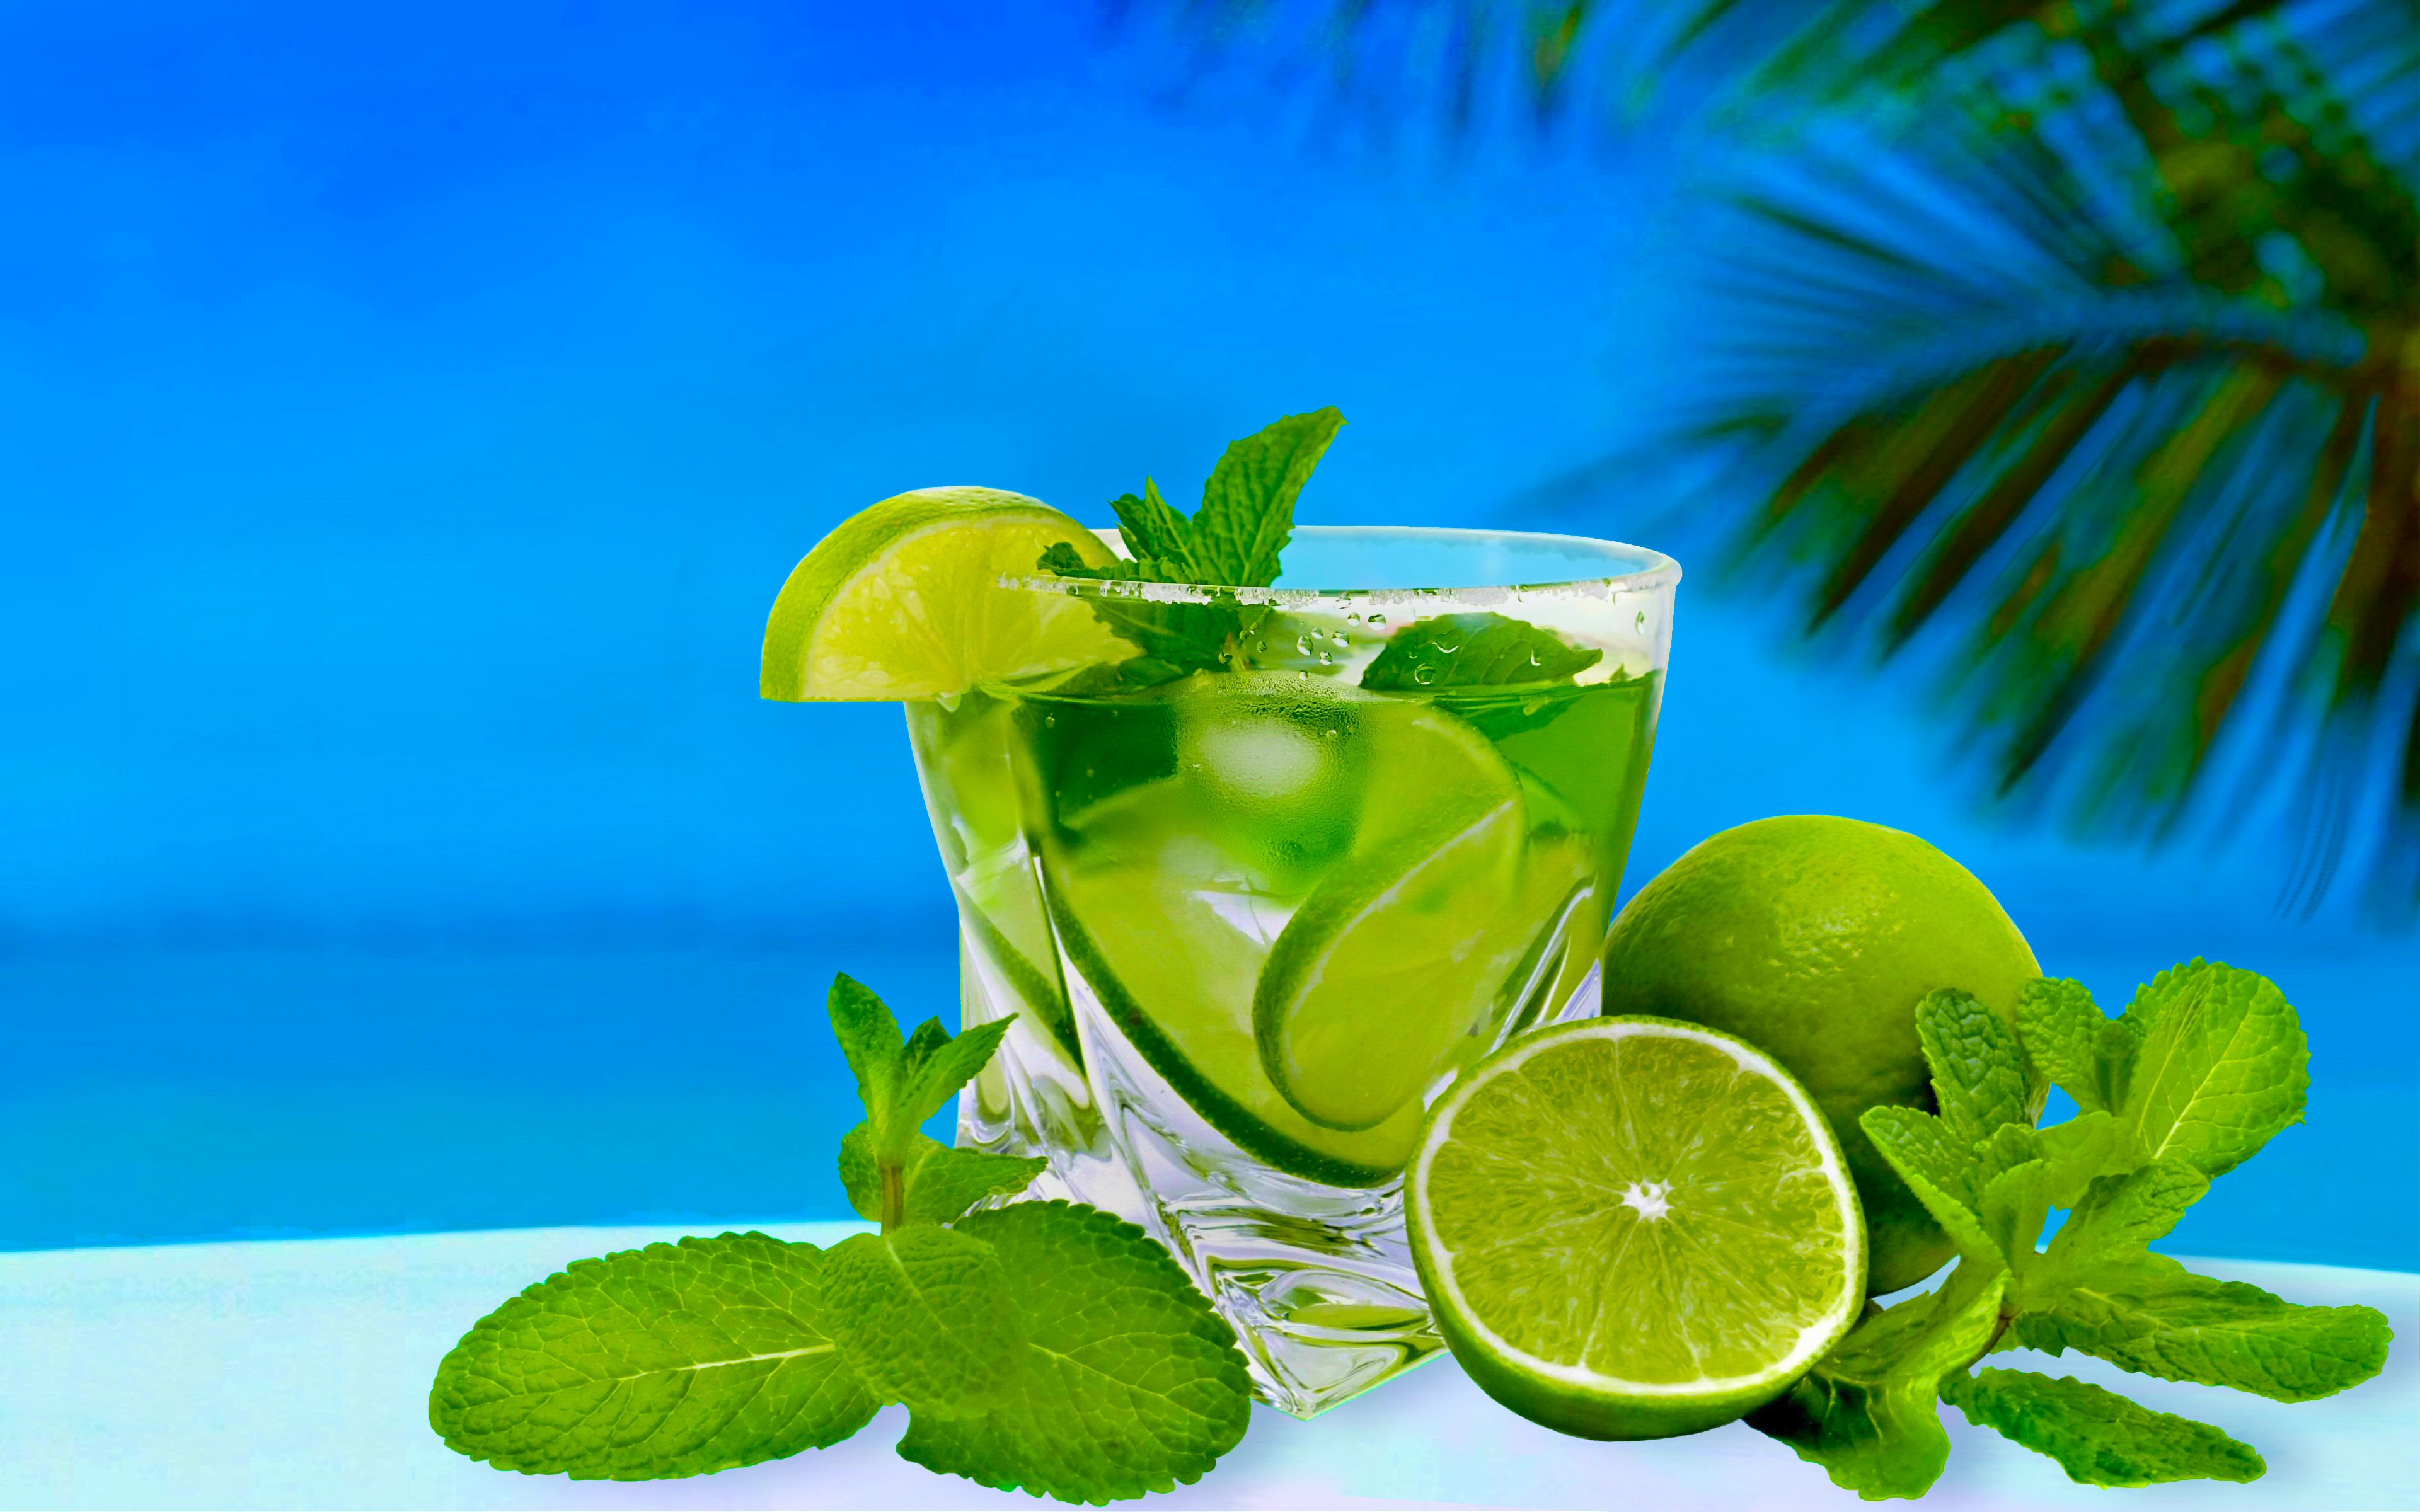 summer, mojito, lemon, glass, food, cocktail, drink, lime, tropical wallpaper for mobile